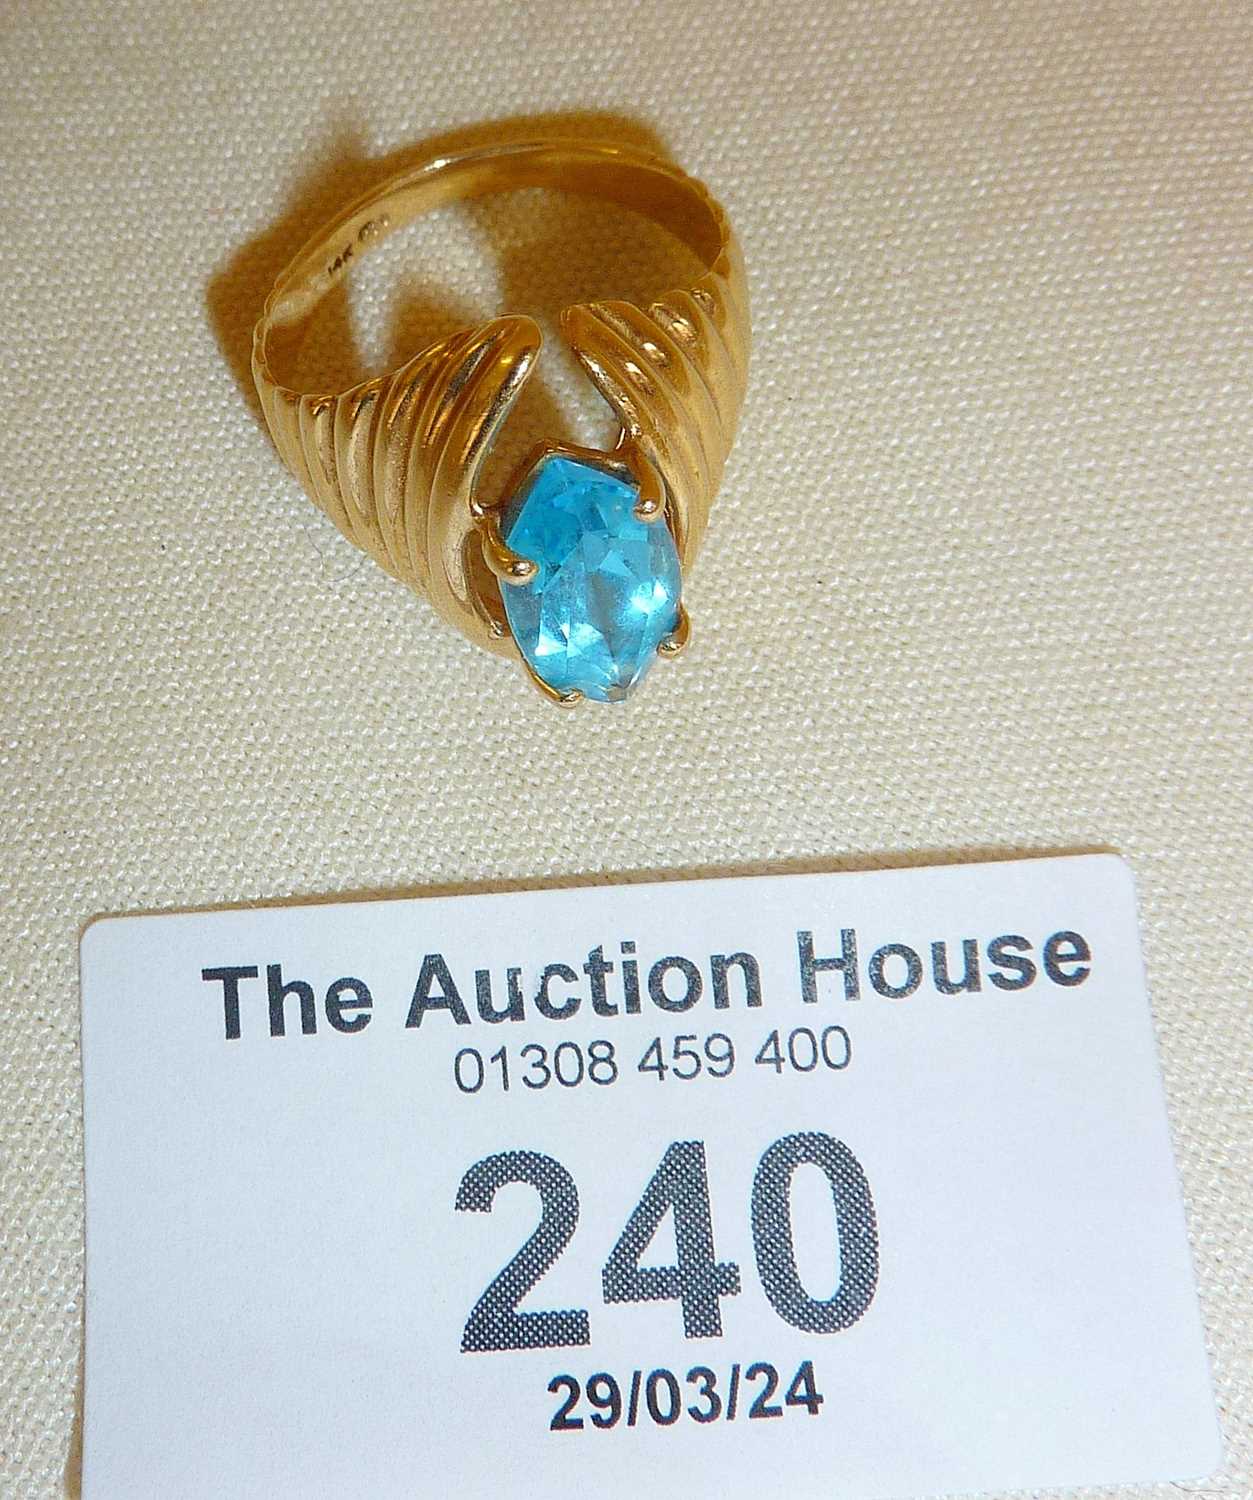 14ct gold ring with a marquise cut blue topaz, approx. UK size L and weight 3.5g - Image 2 of 2